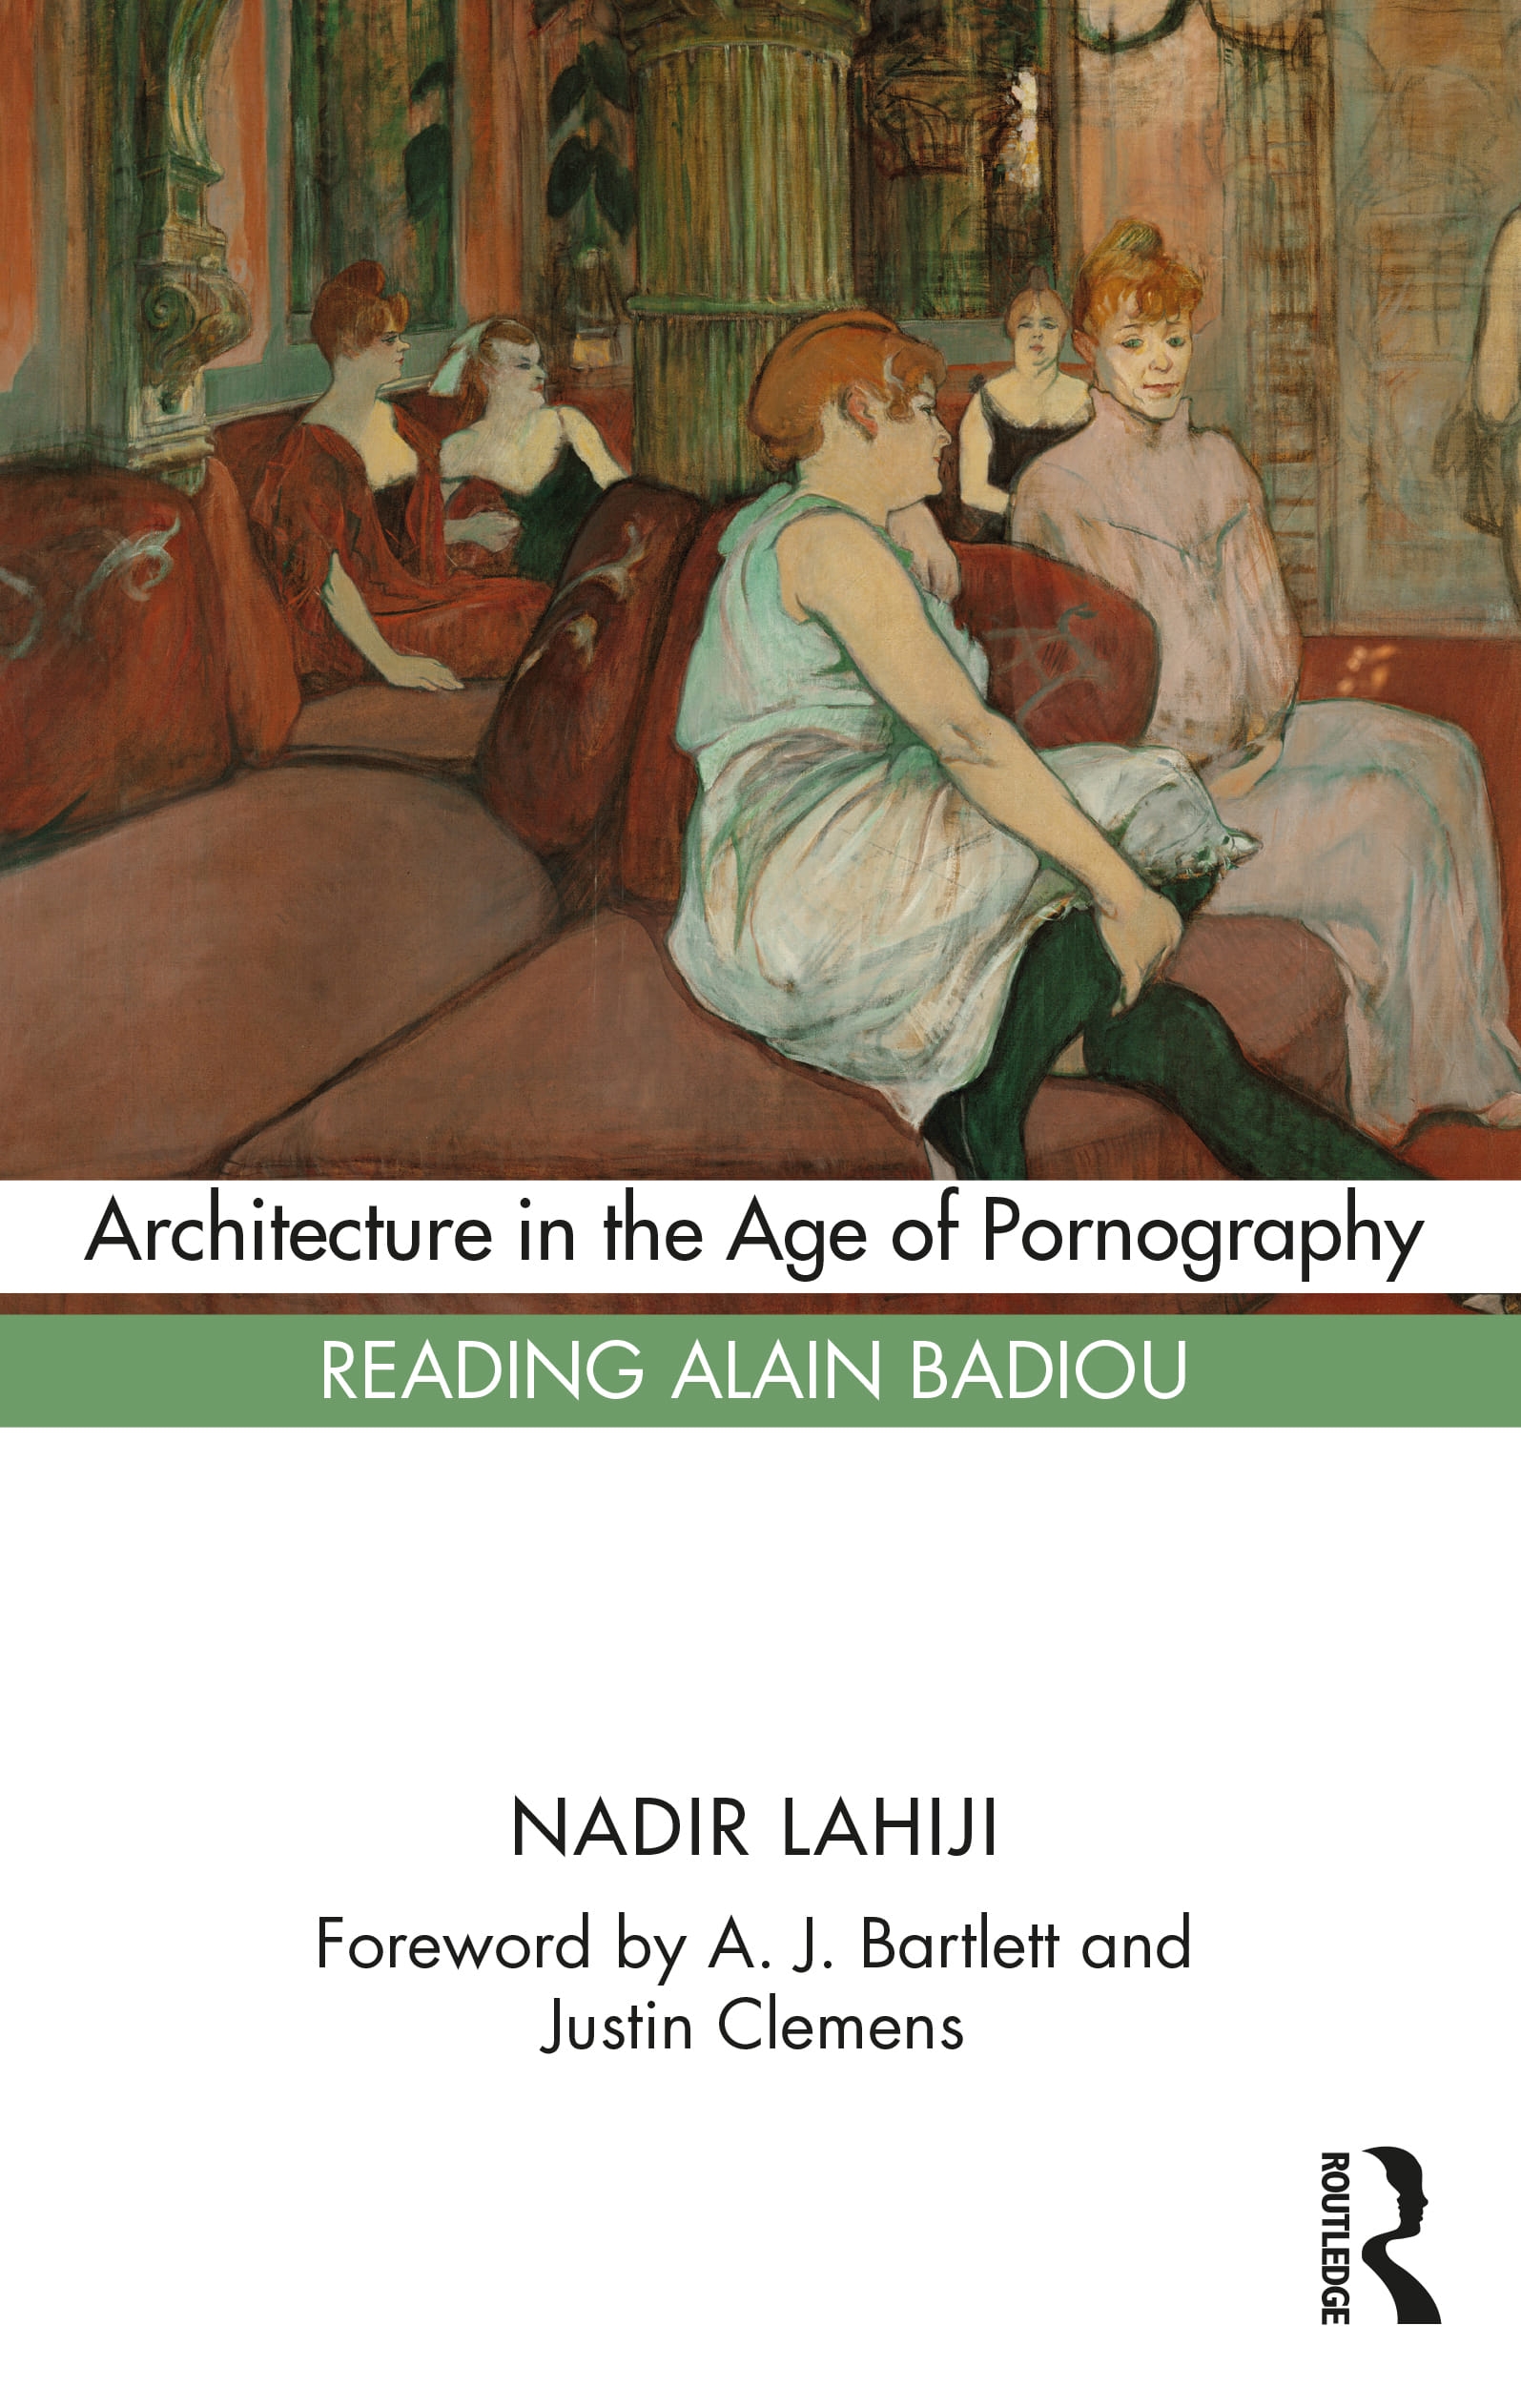 Architecture in the Age of Pornography: Reading Alain Badiou